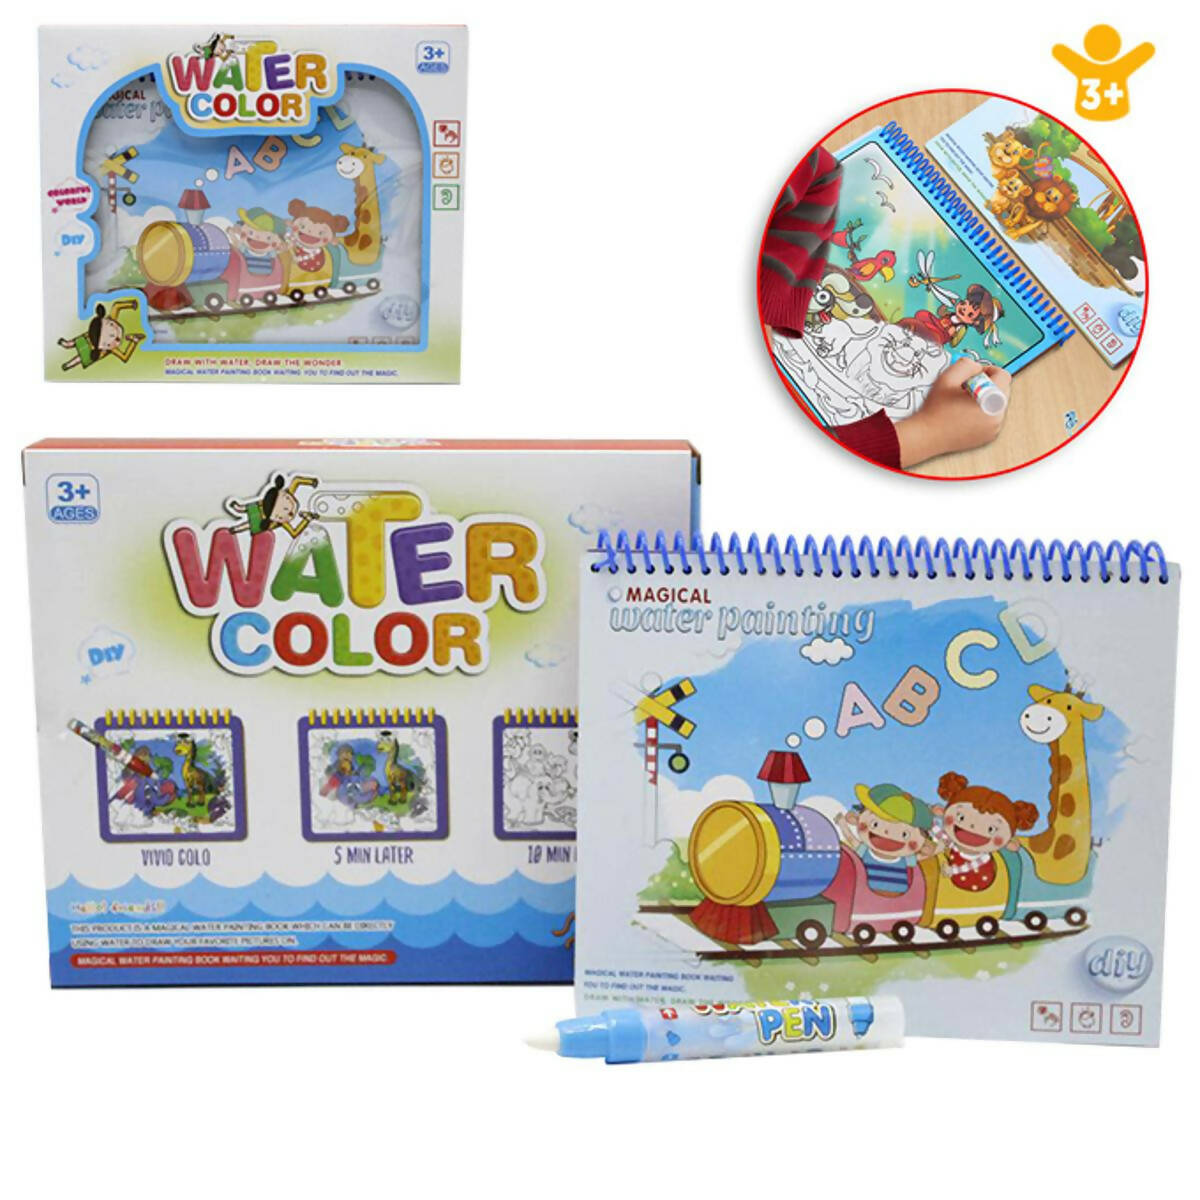 Magical Water Color Painting Book Letters for Kids Educational & Learning Toy